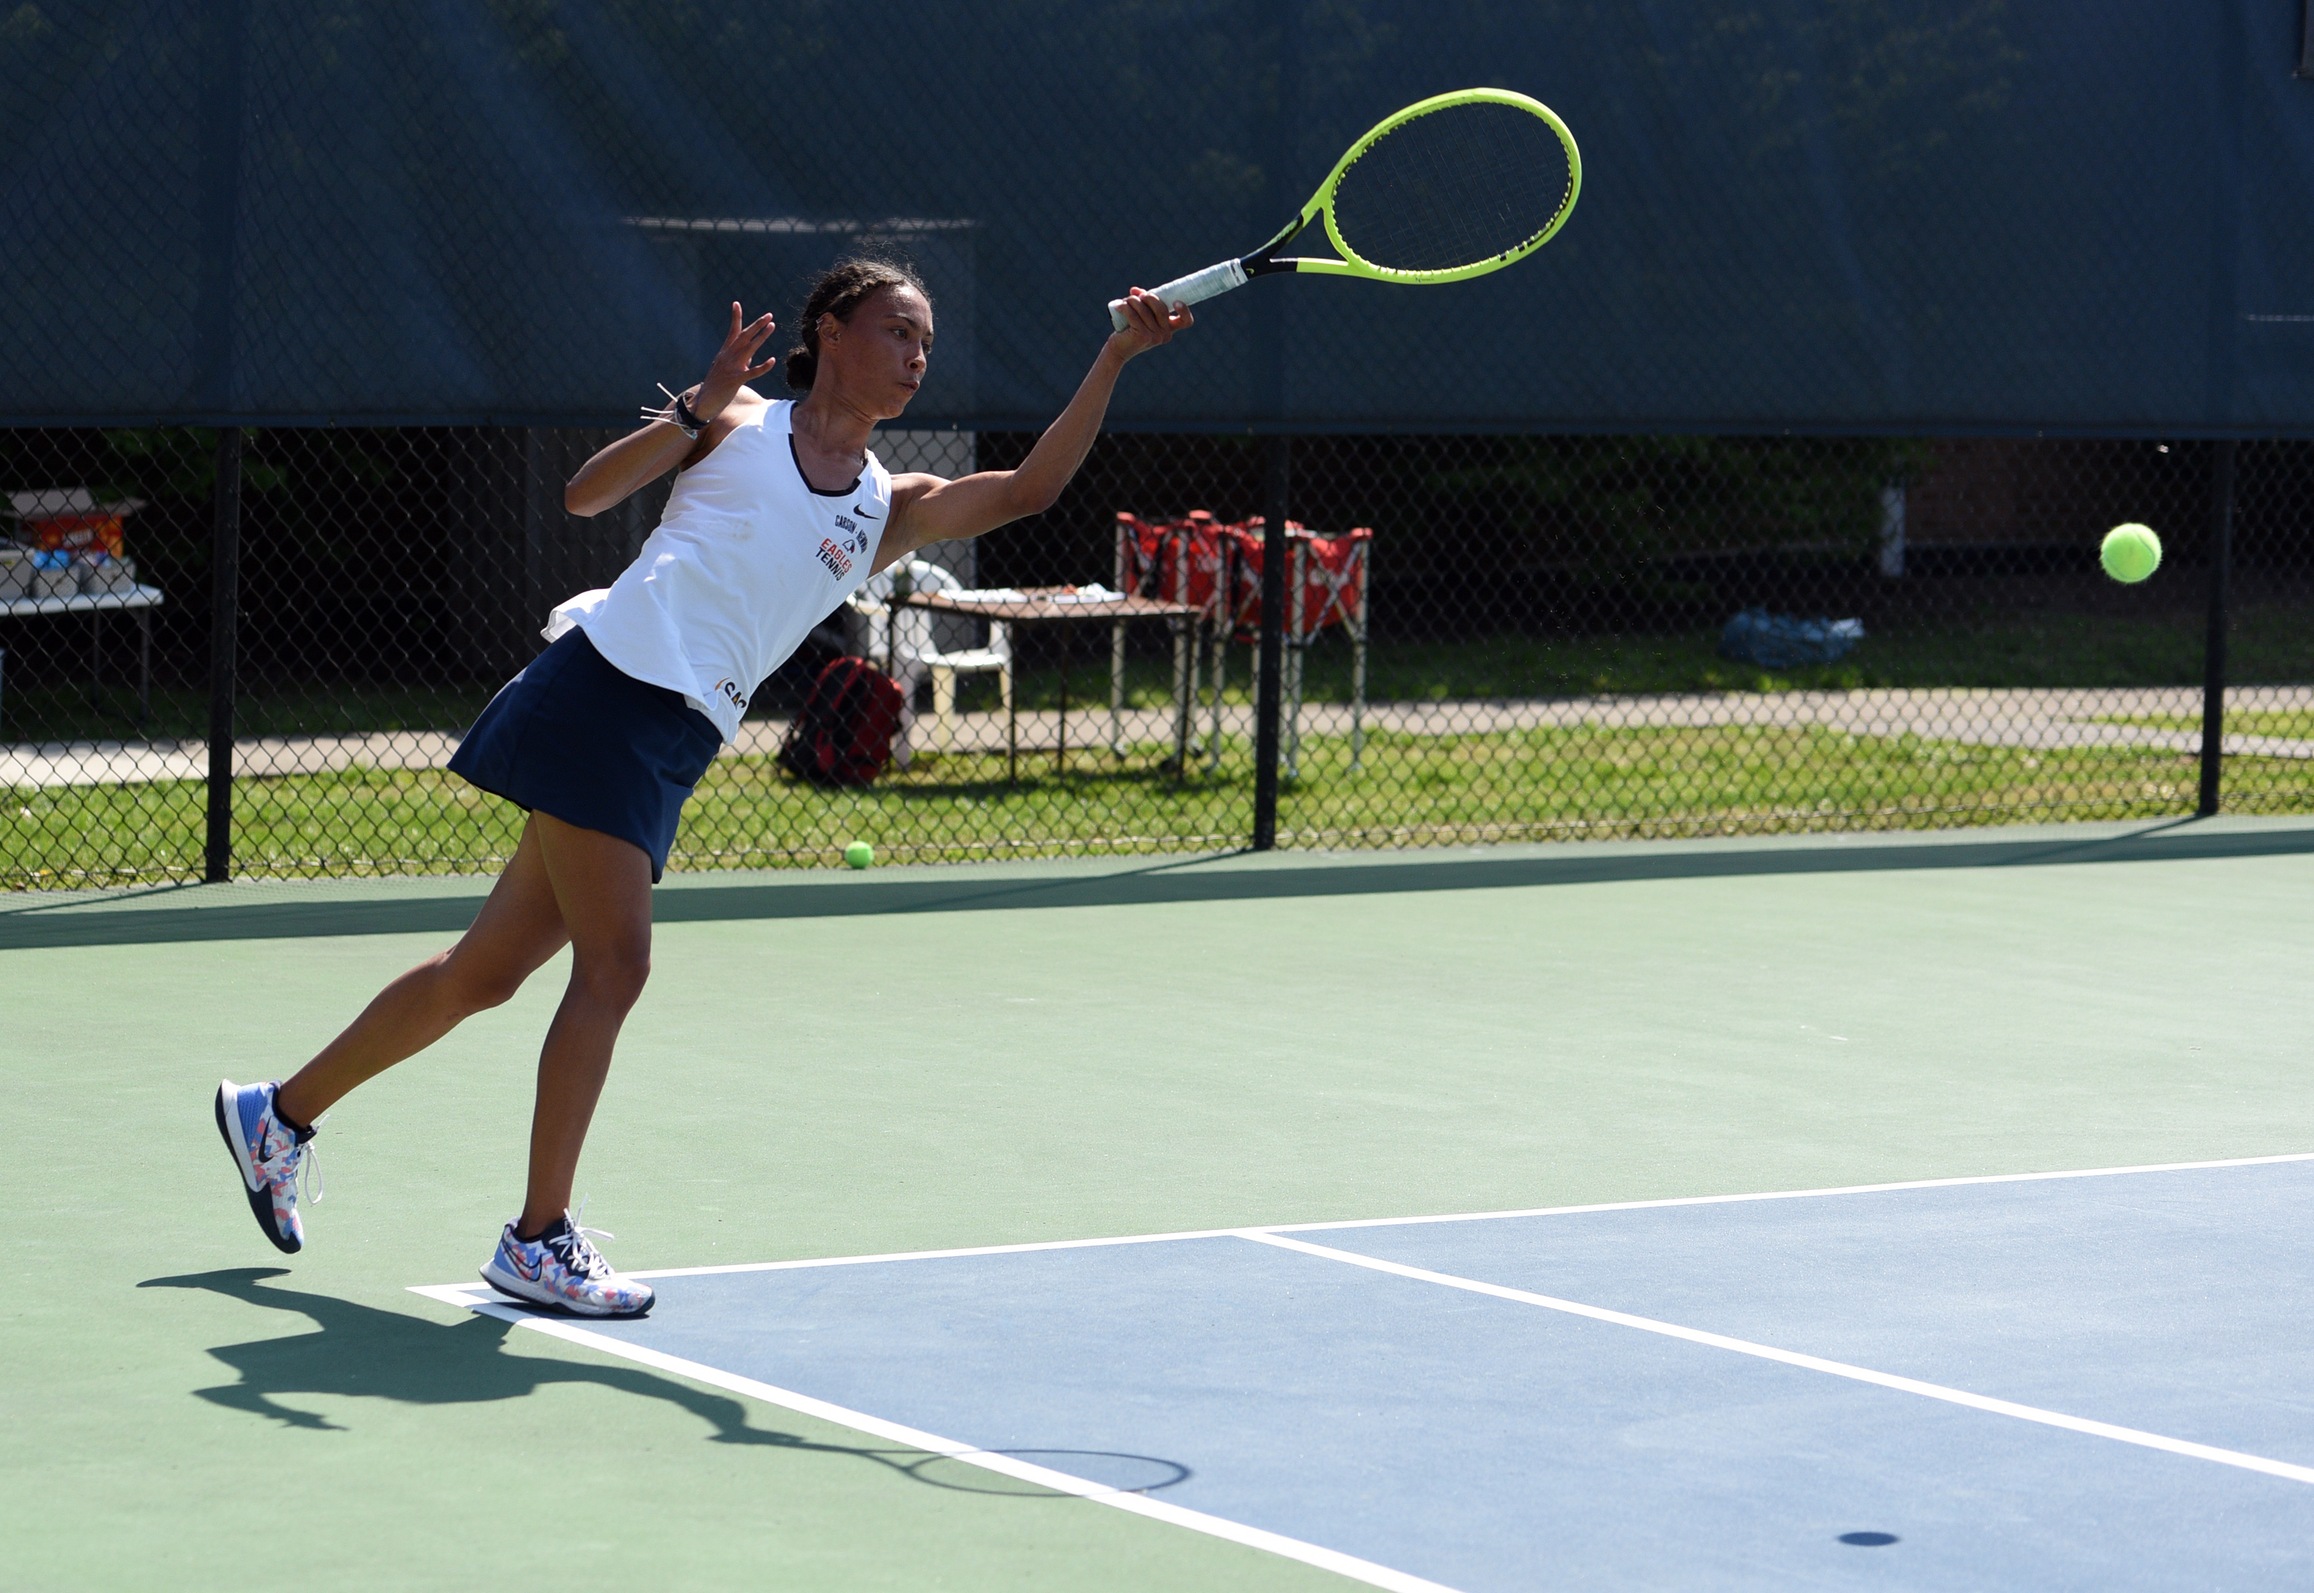 Eagles led by Resende and Khisamova after day one of ITAs